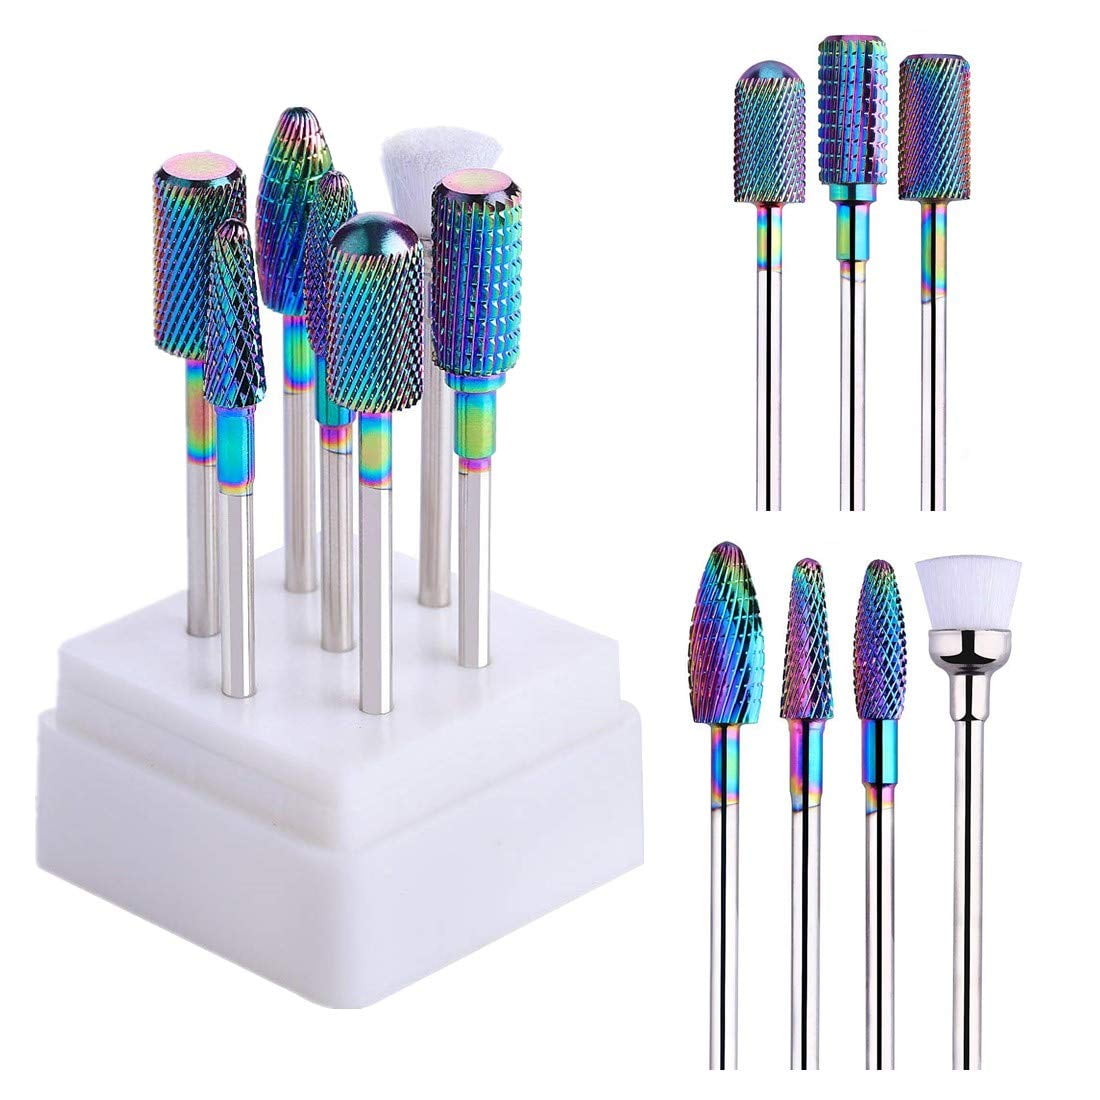 The Full Aspects to Consider When Choosing Your Ideal Nail Drill Bits